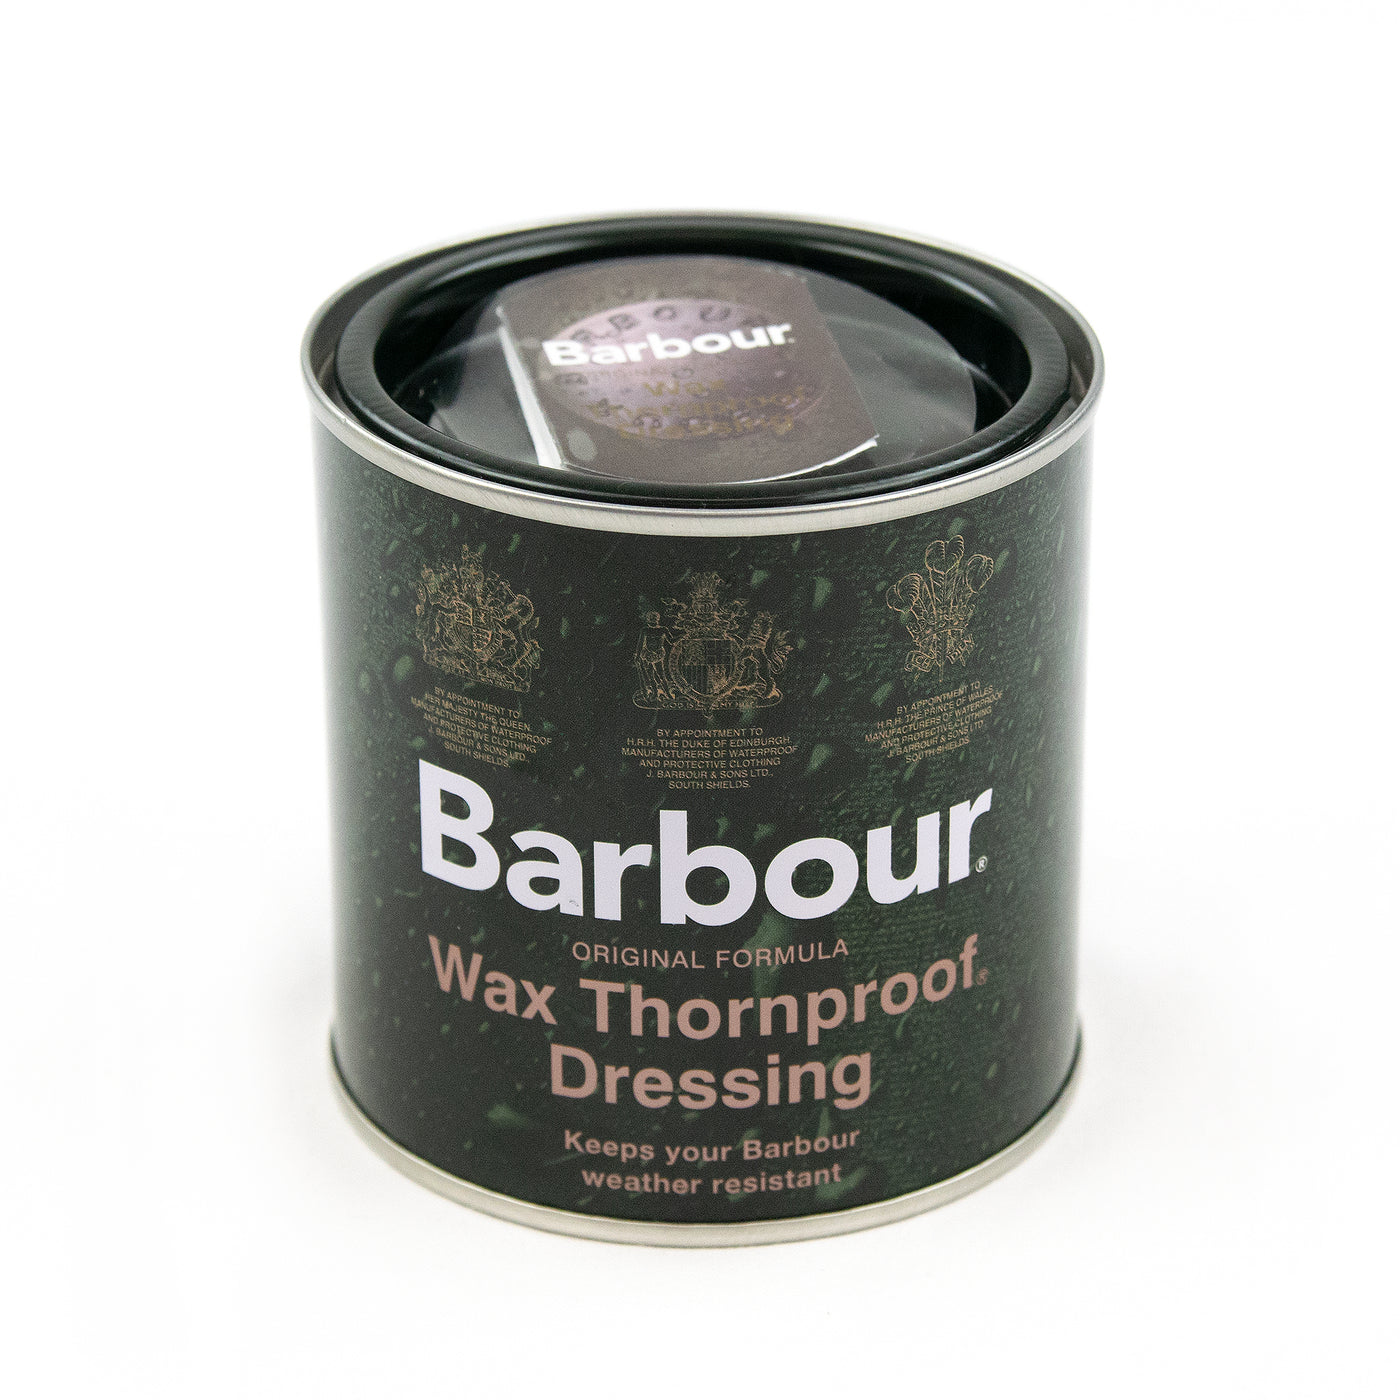 Barbour Re-wax Thornproof Dressing FRONT